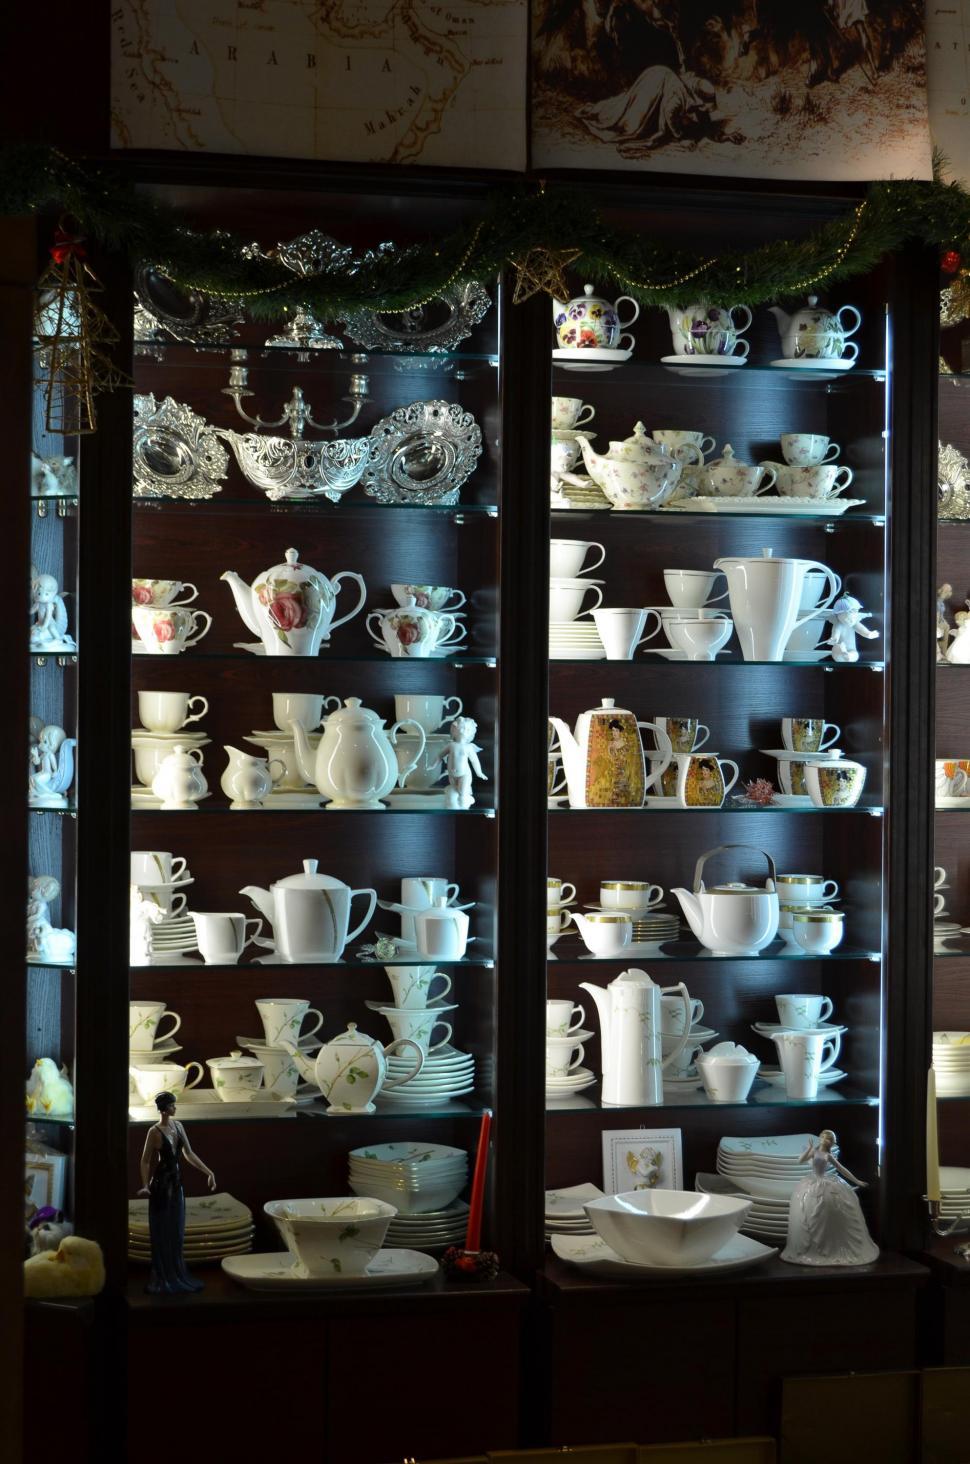 Free Image of Display Case Filled With White Dishes 